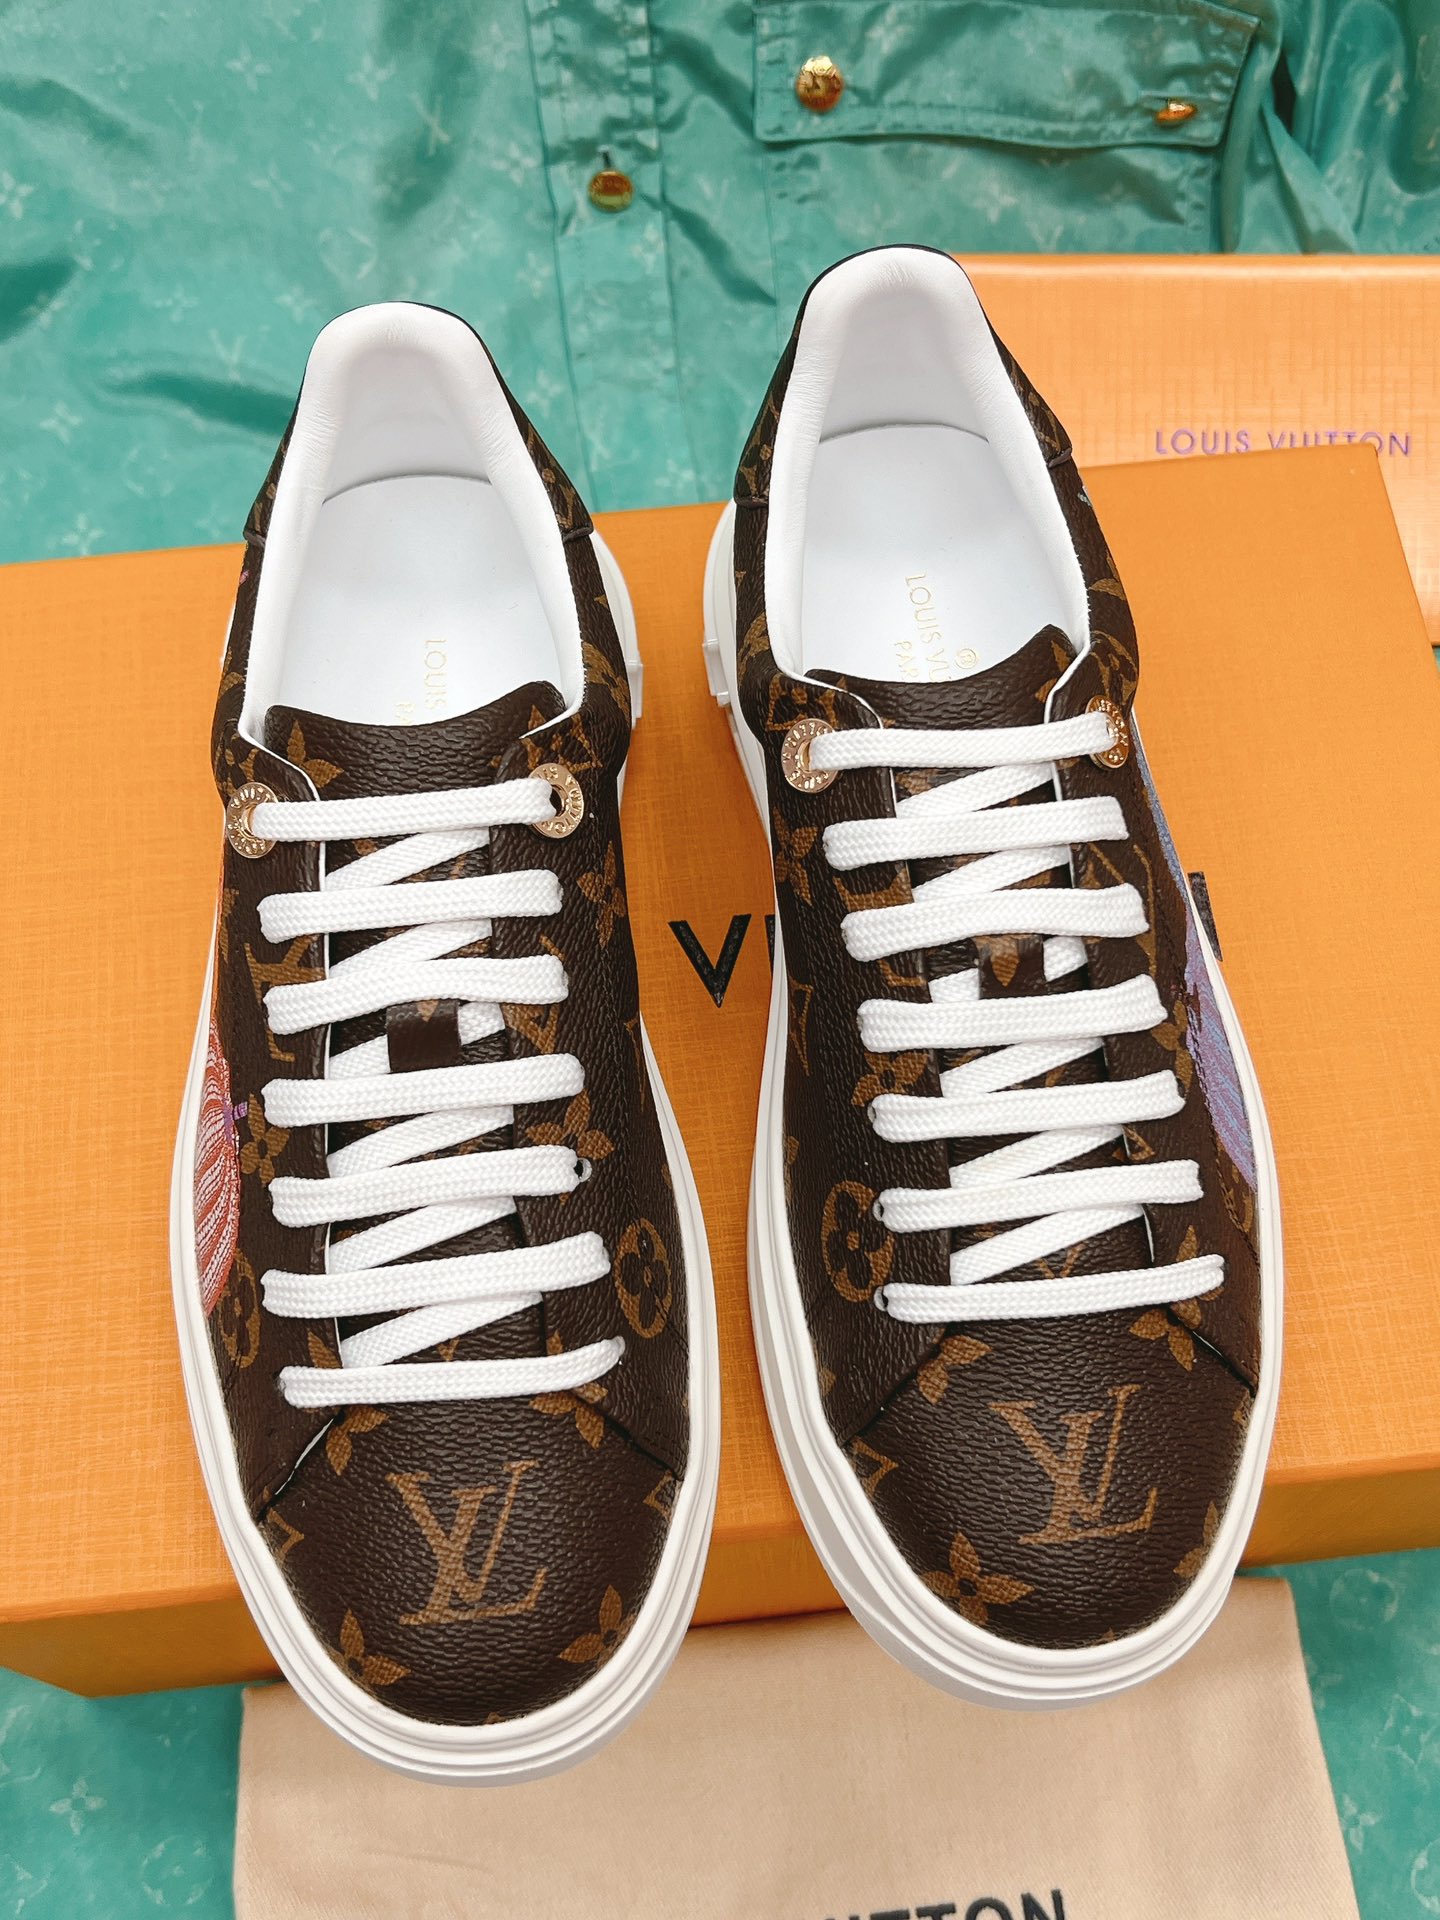 Louis Vuitton Skateboard Shoes Sellers Online
 White Unisex Cowhide Silk Spring Collection Fashion